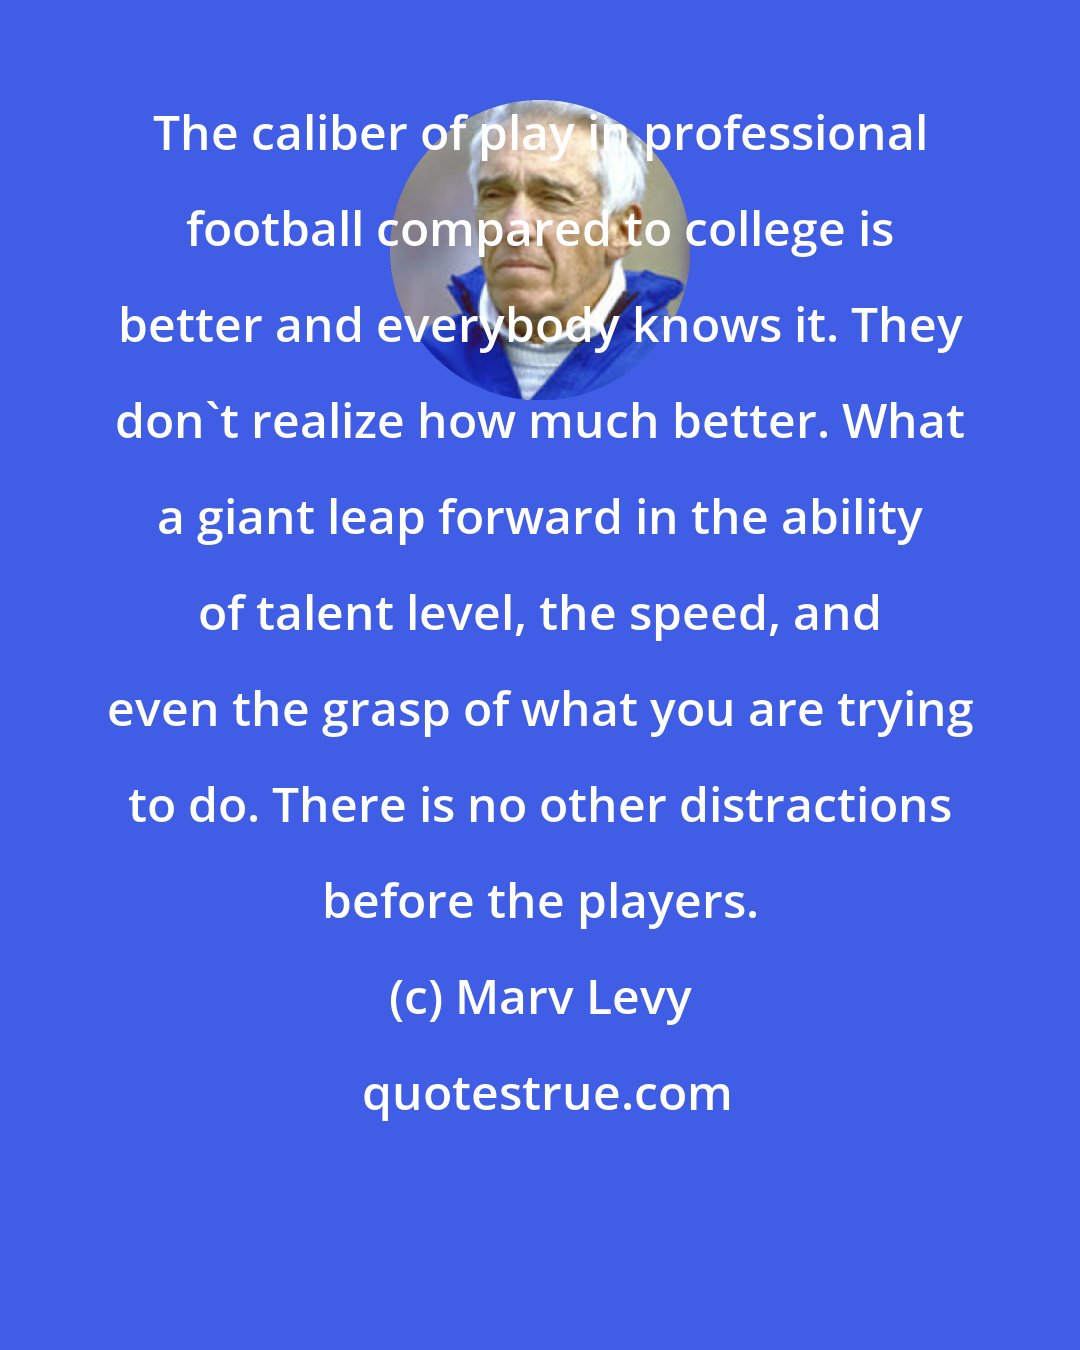 Marv Levy: The caliber of play in professional football compared to college is better and everybody knows it. They don't realize how much better. What a giant leap forward in the ability of talent level, the speed, and even the grasp of what you are trying to do. There is no other distractions before the players.